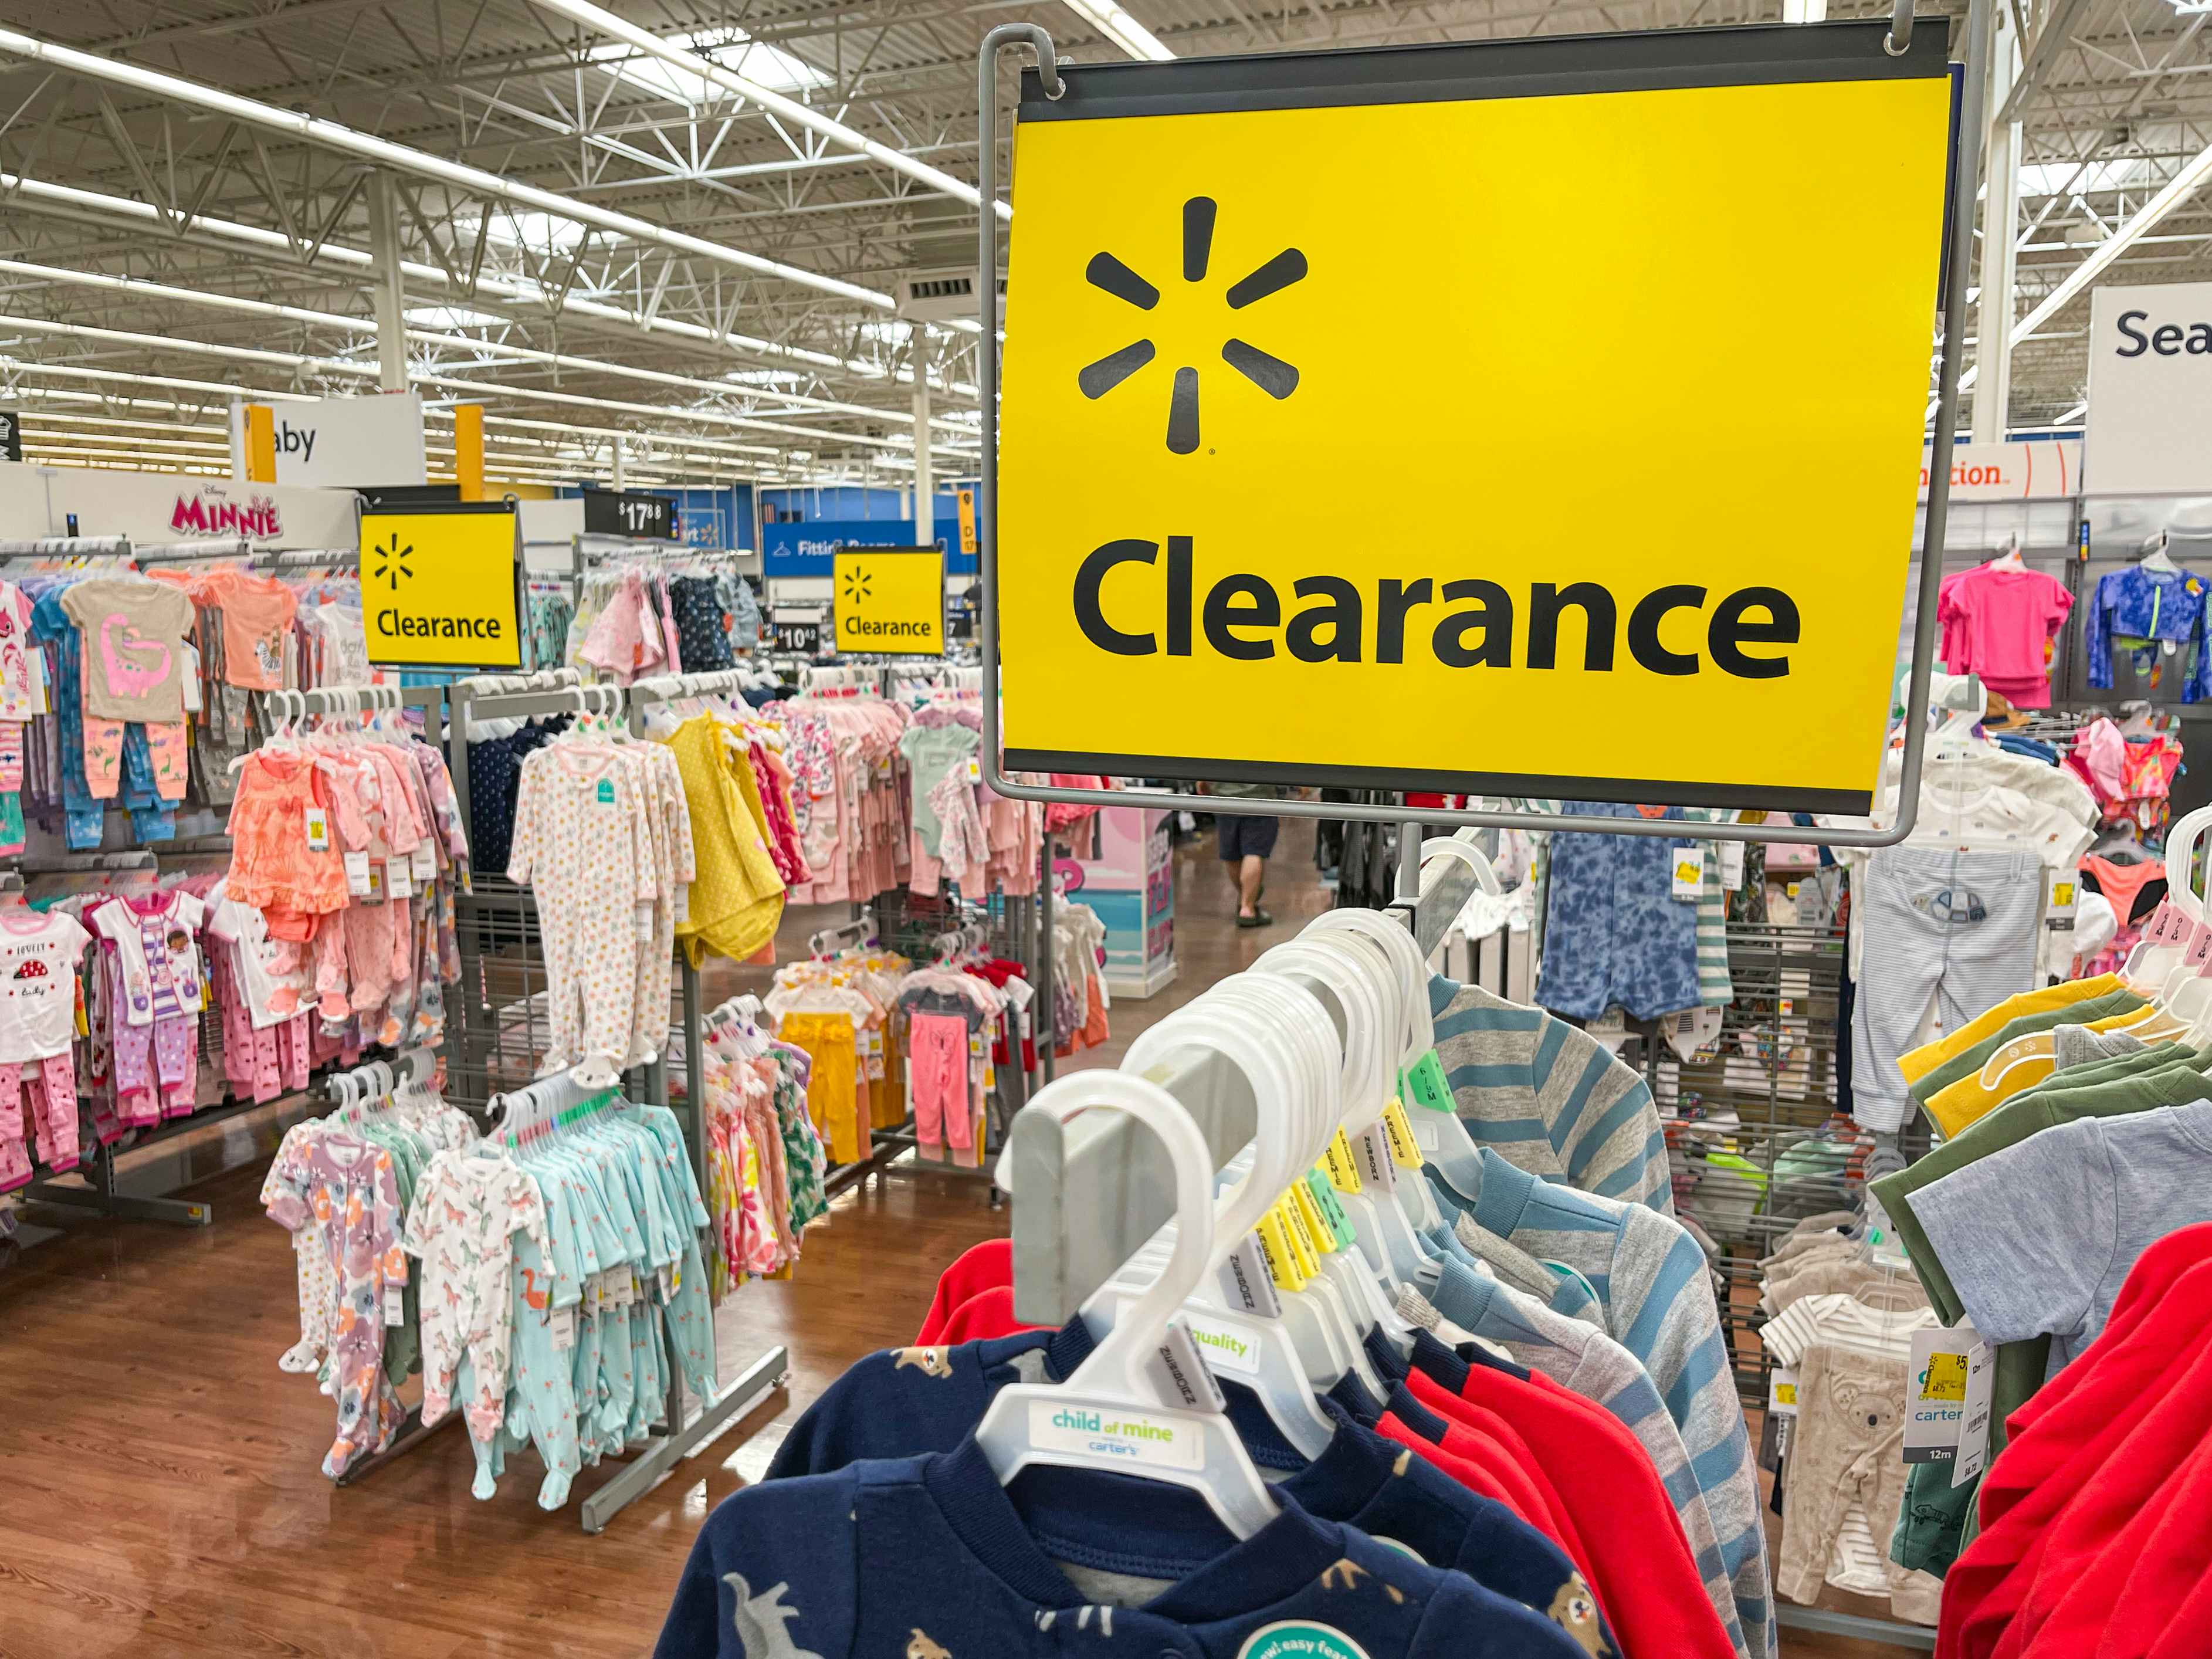 A clearance sign in the clearance section for kids pajamas